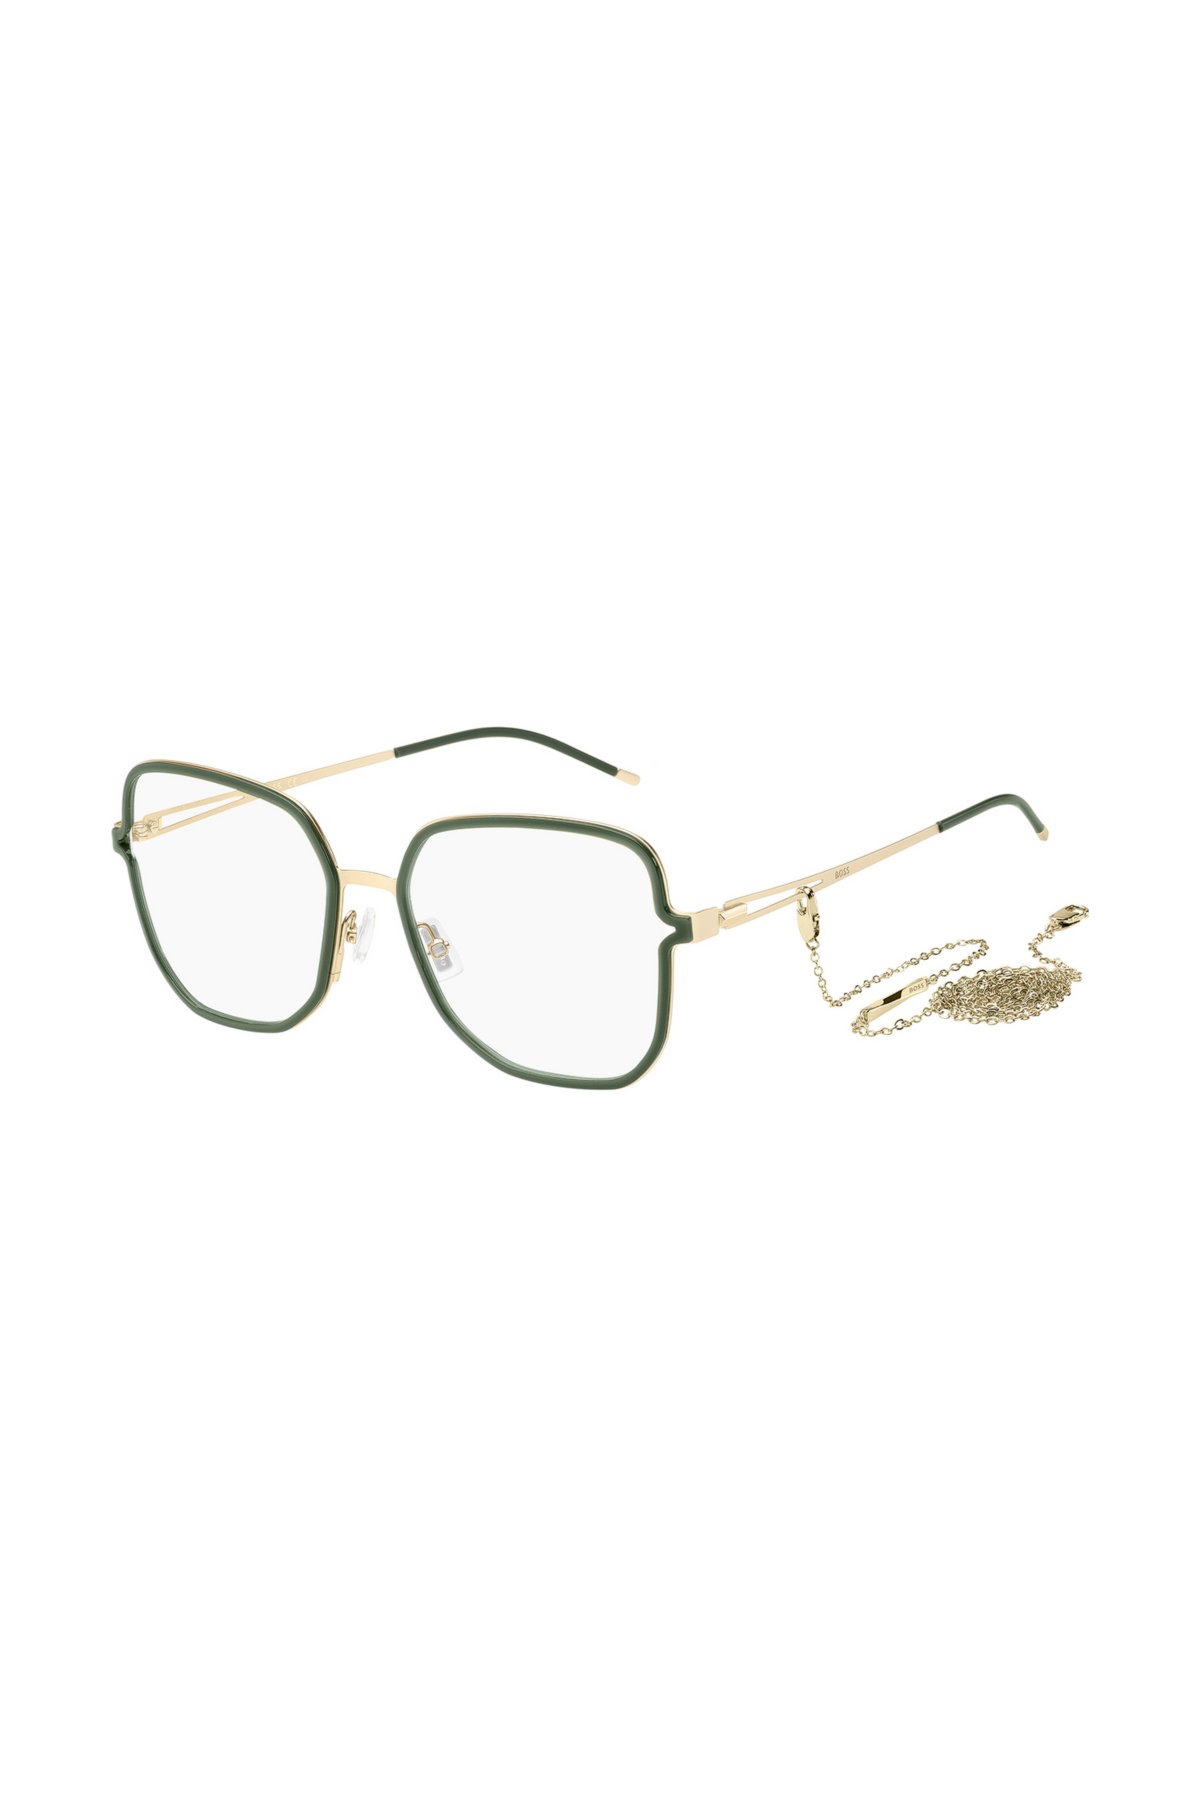 Green optical frames with forked temples and branded chain, Green